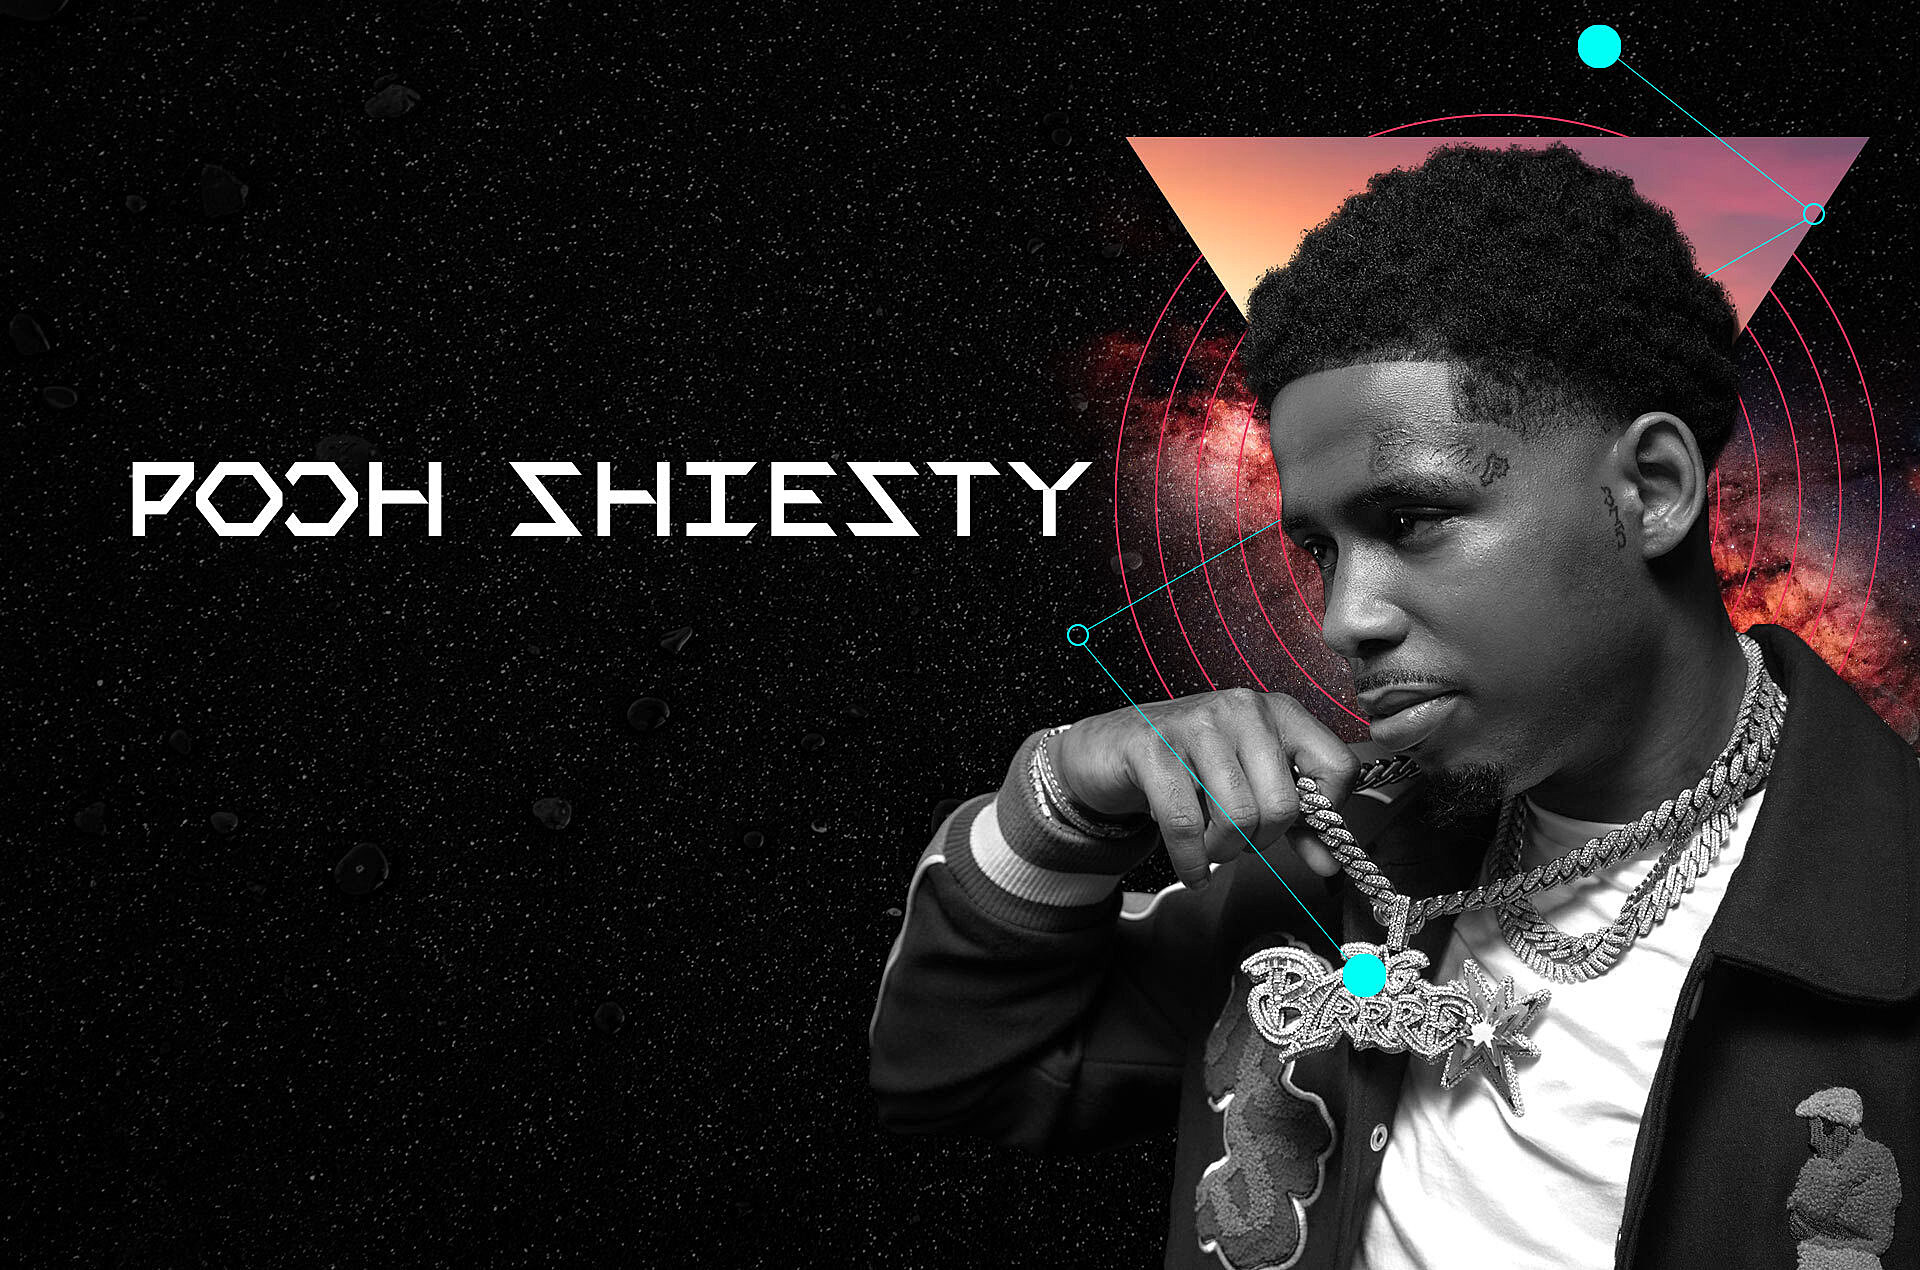 Pooh Shiesty Shares Shiesty Season Certified f Gucci Mane Gunna  Moneybagg Yo Lil Durk and More  Complex